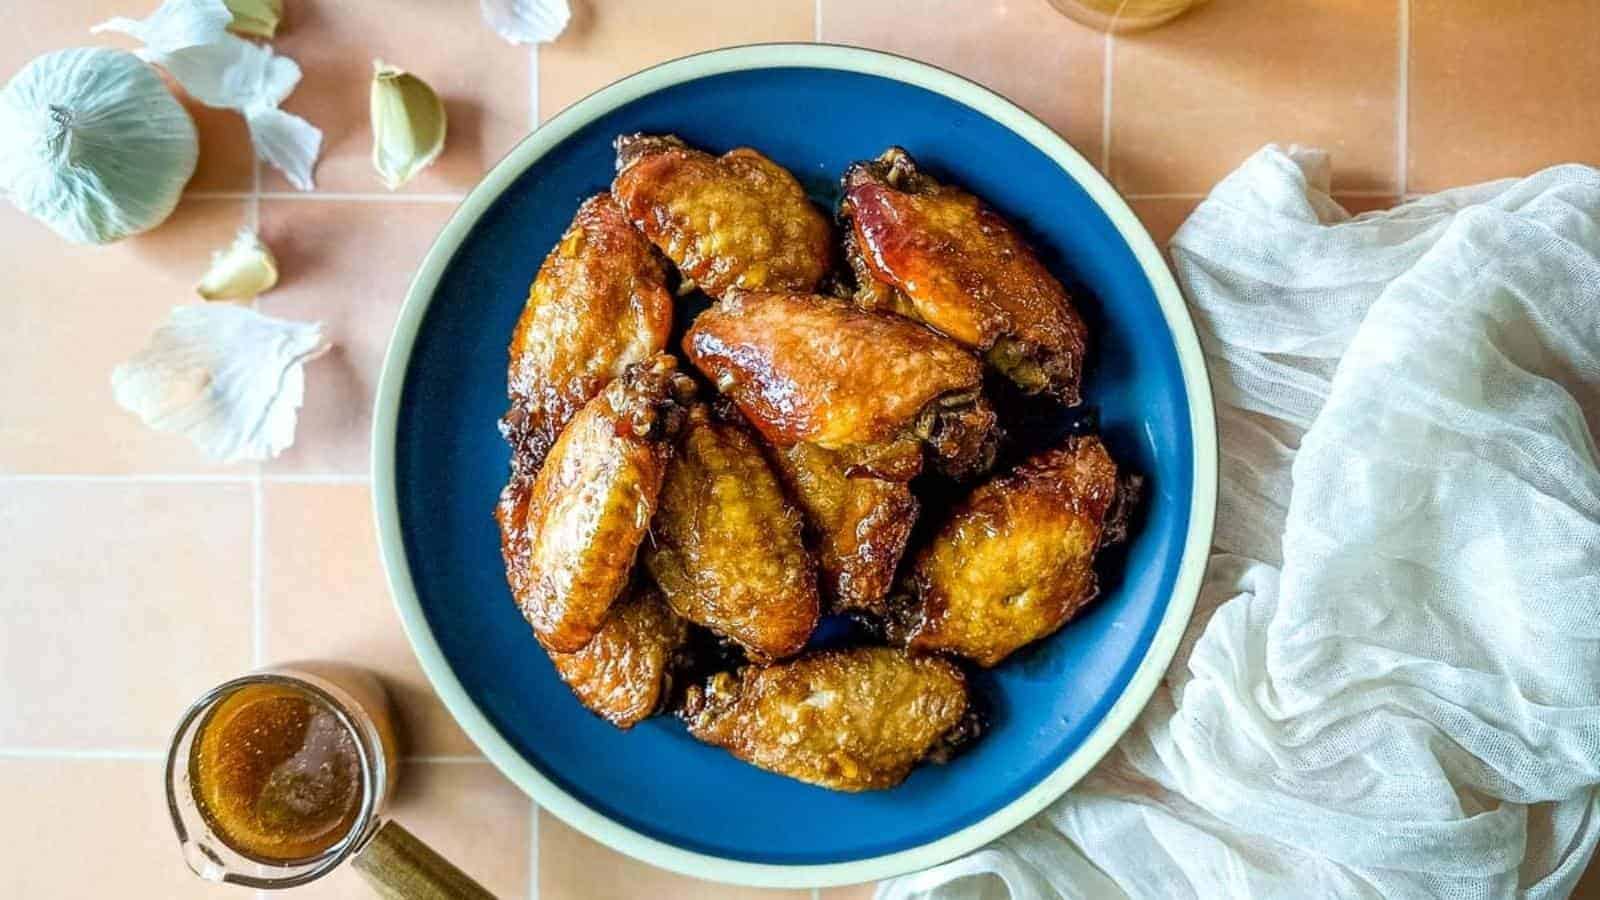 A plate of soy garlic chicken wings.